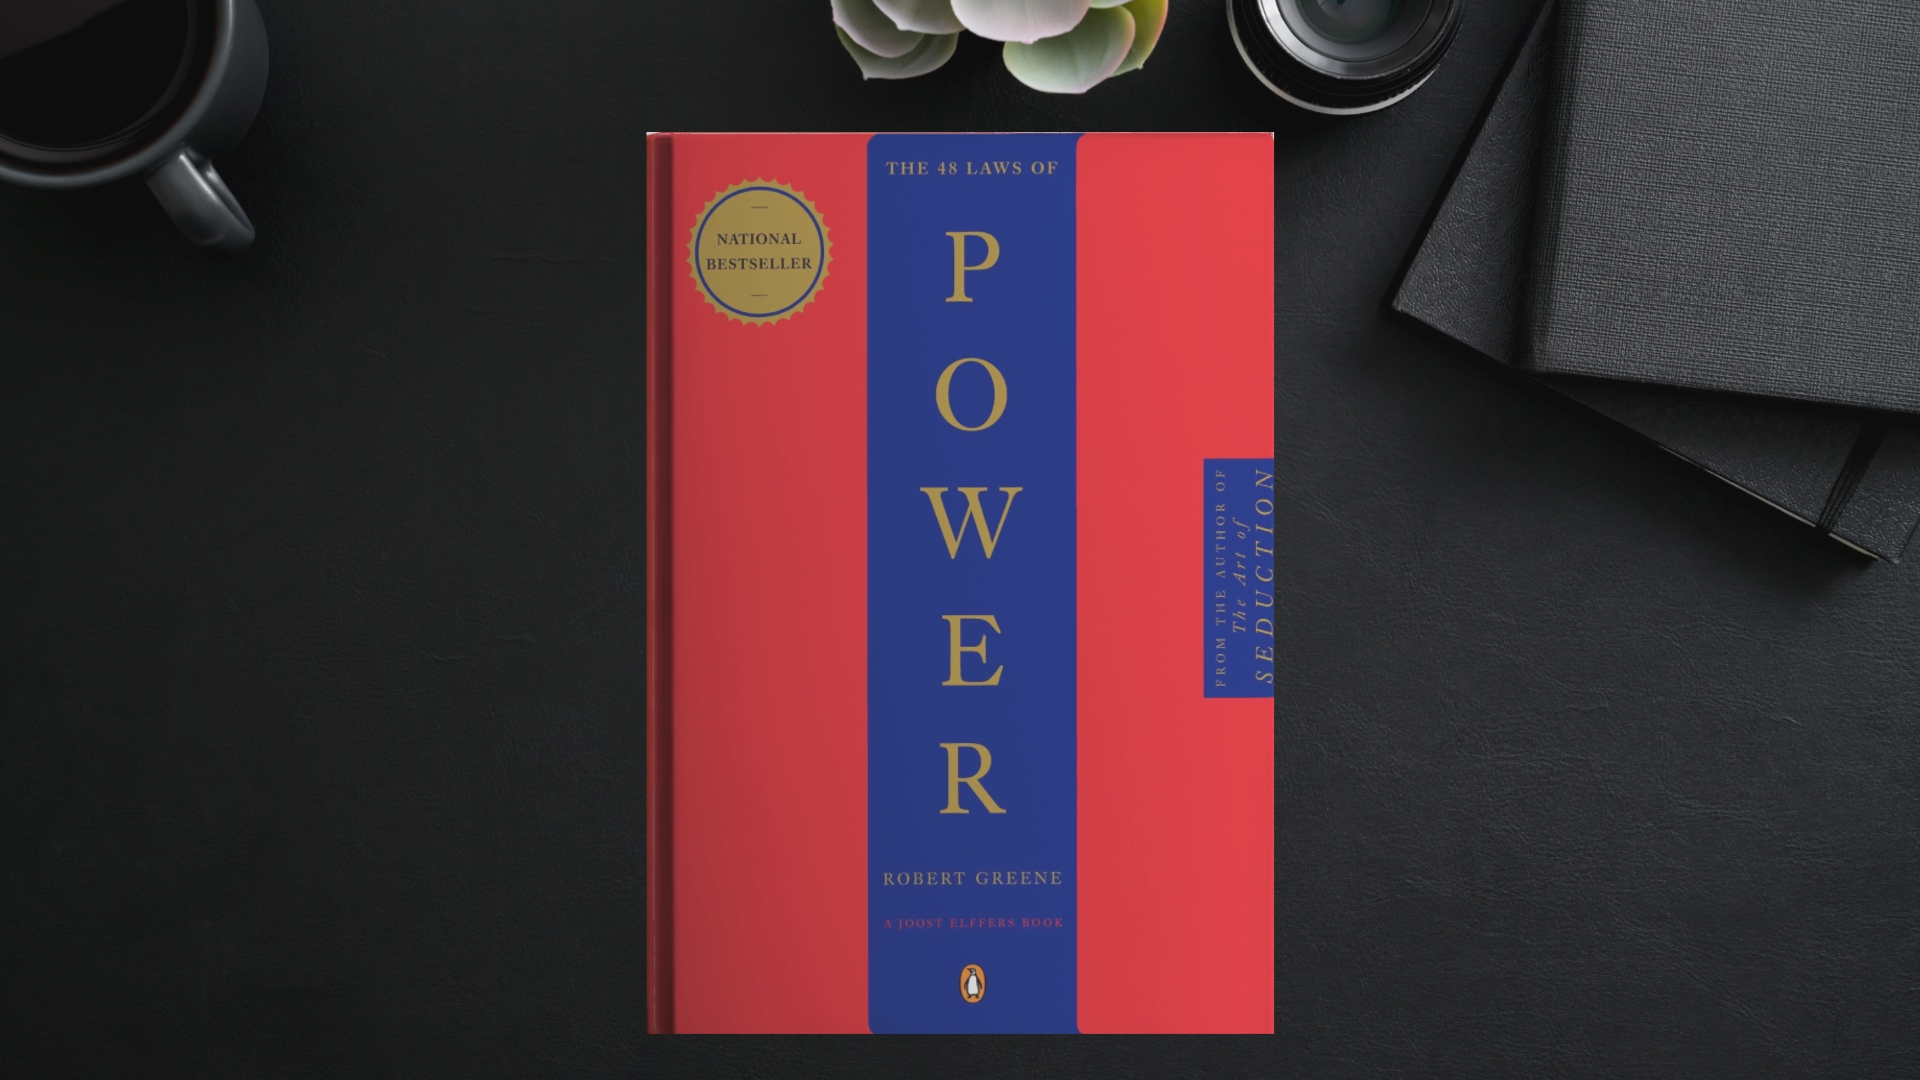 48 laws of power book